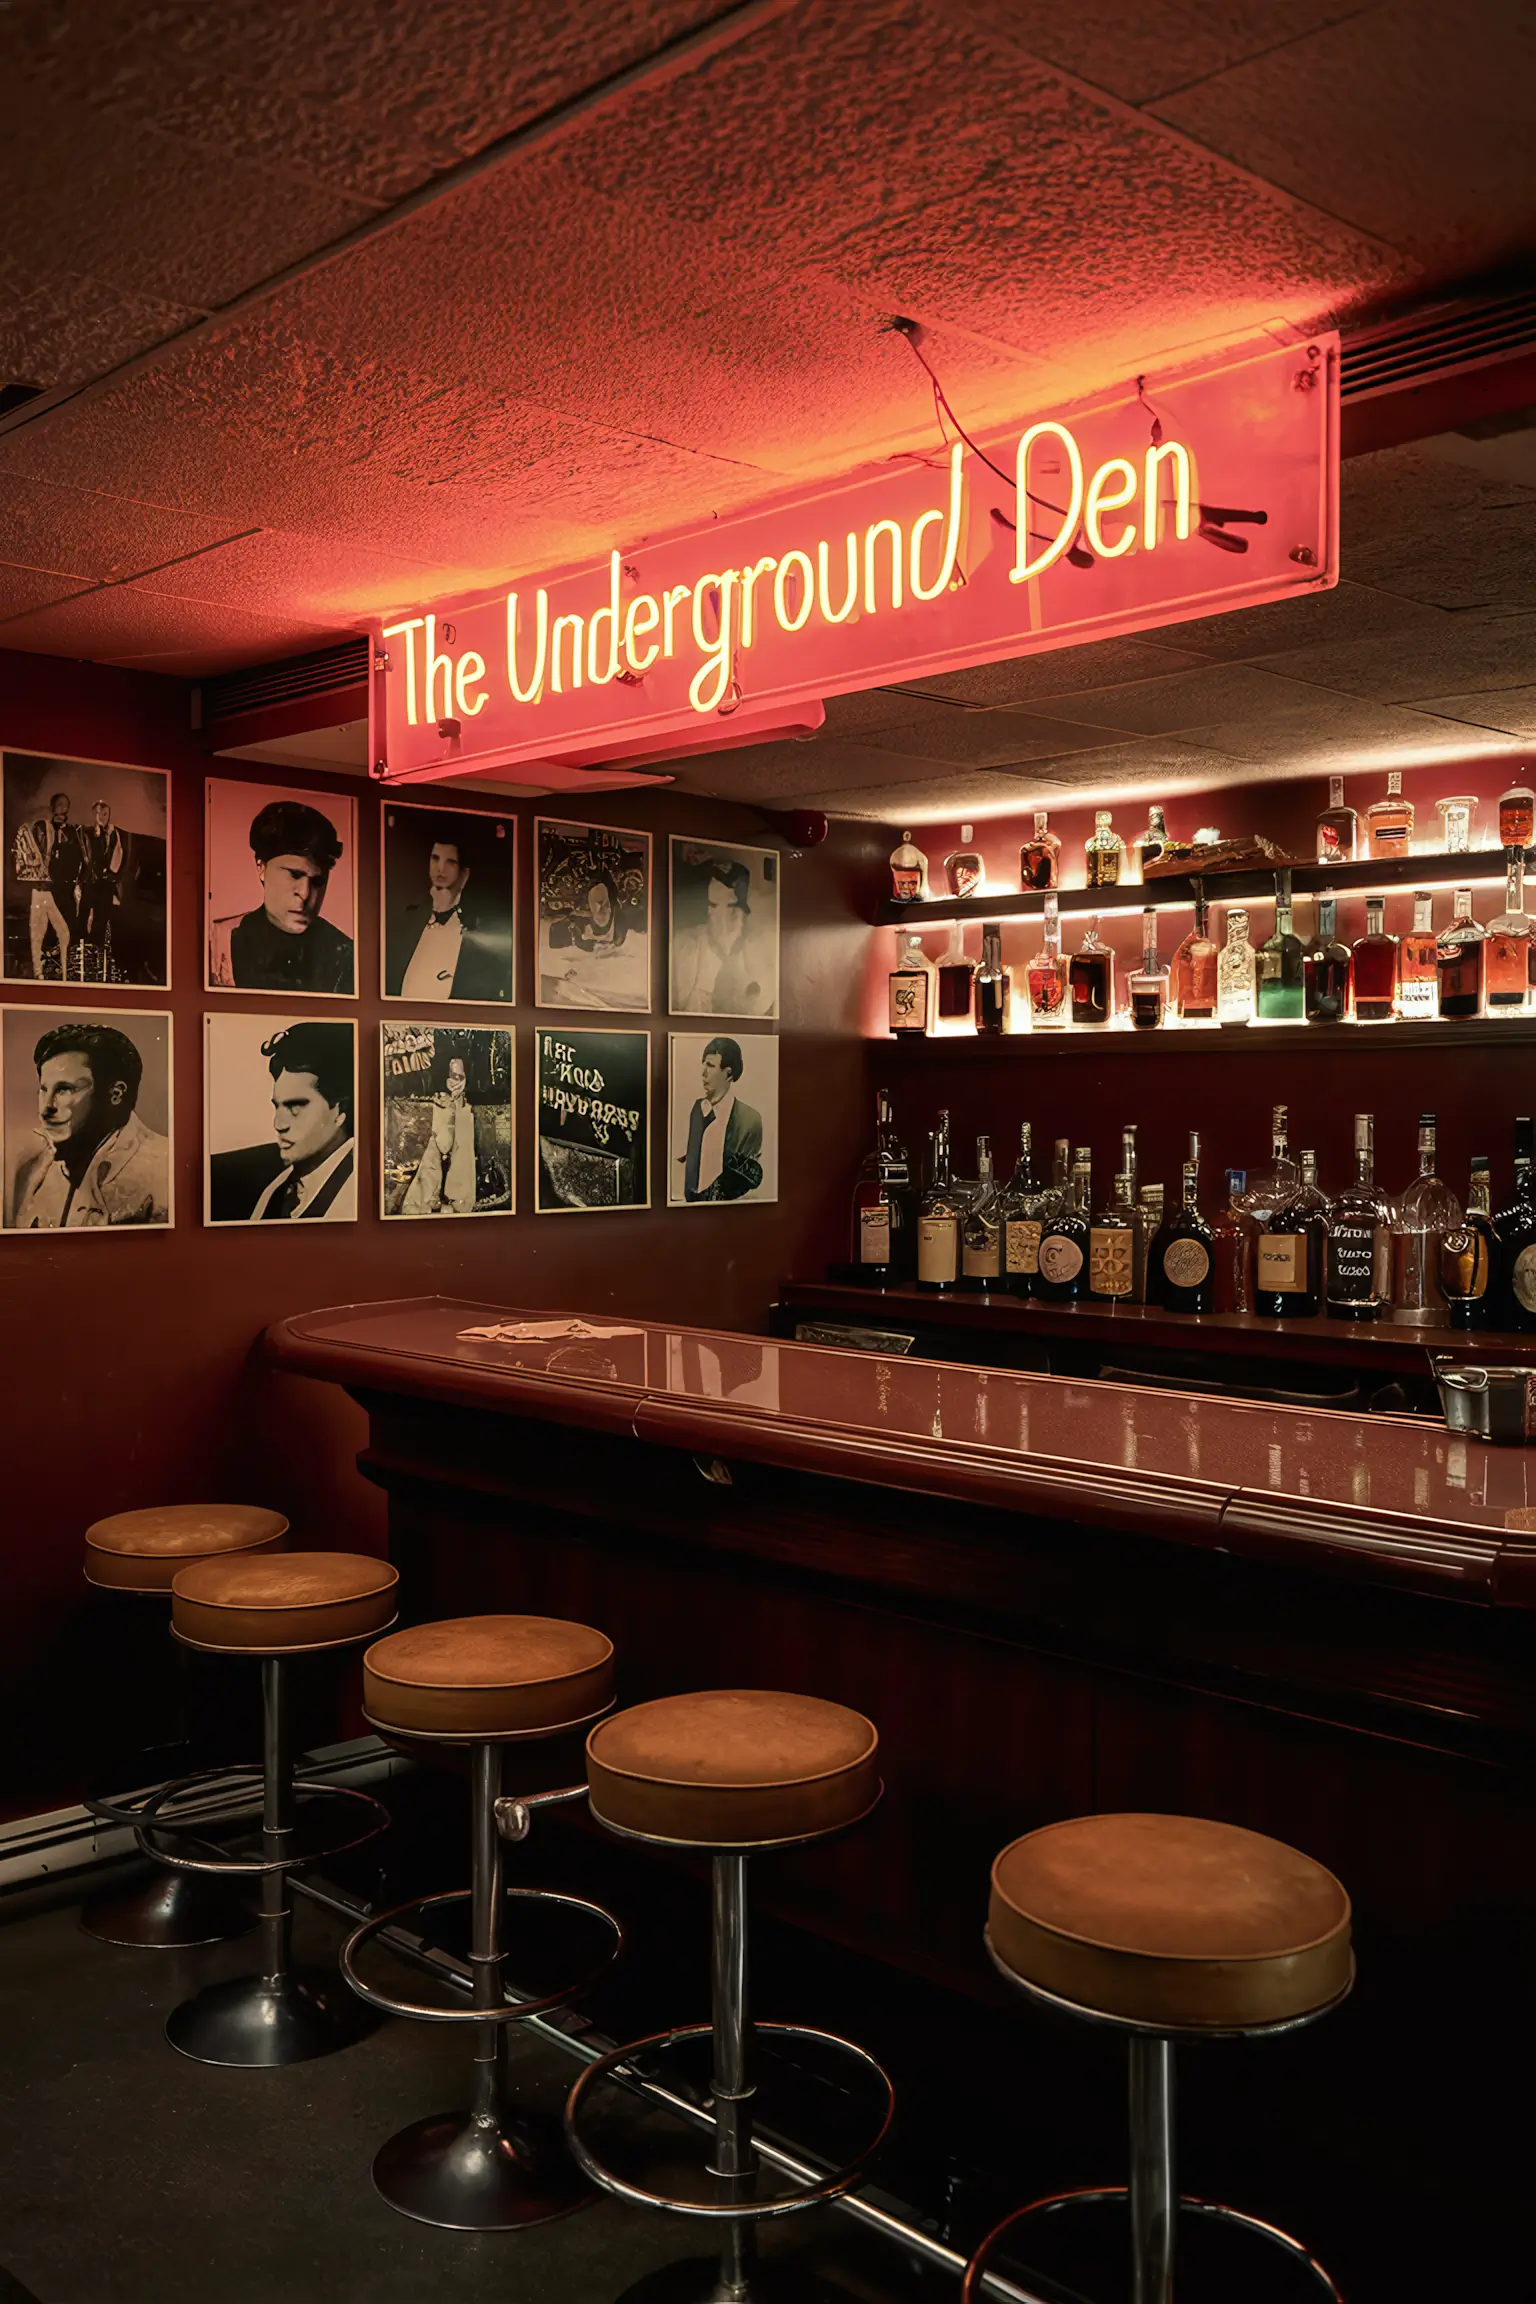 Retro basement bar with neon signs and vintage bar stools.